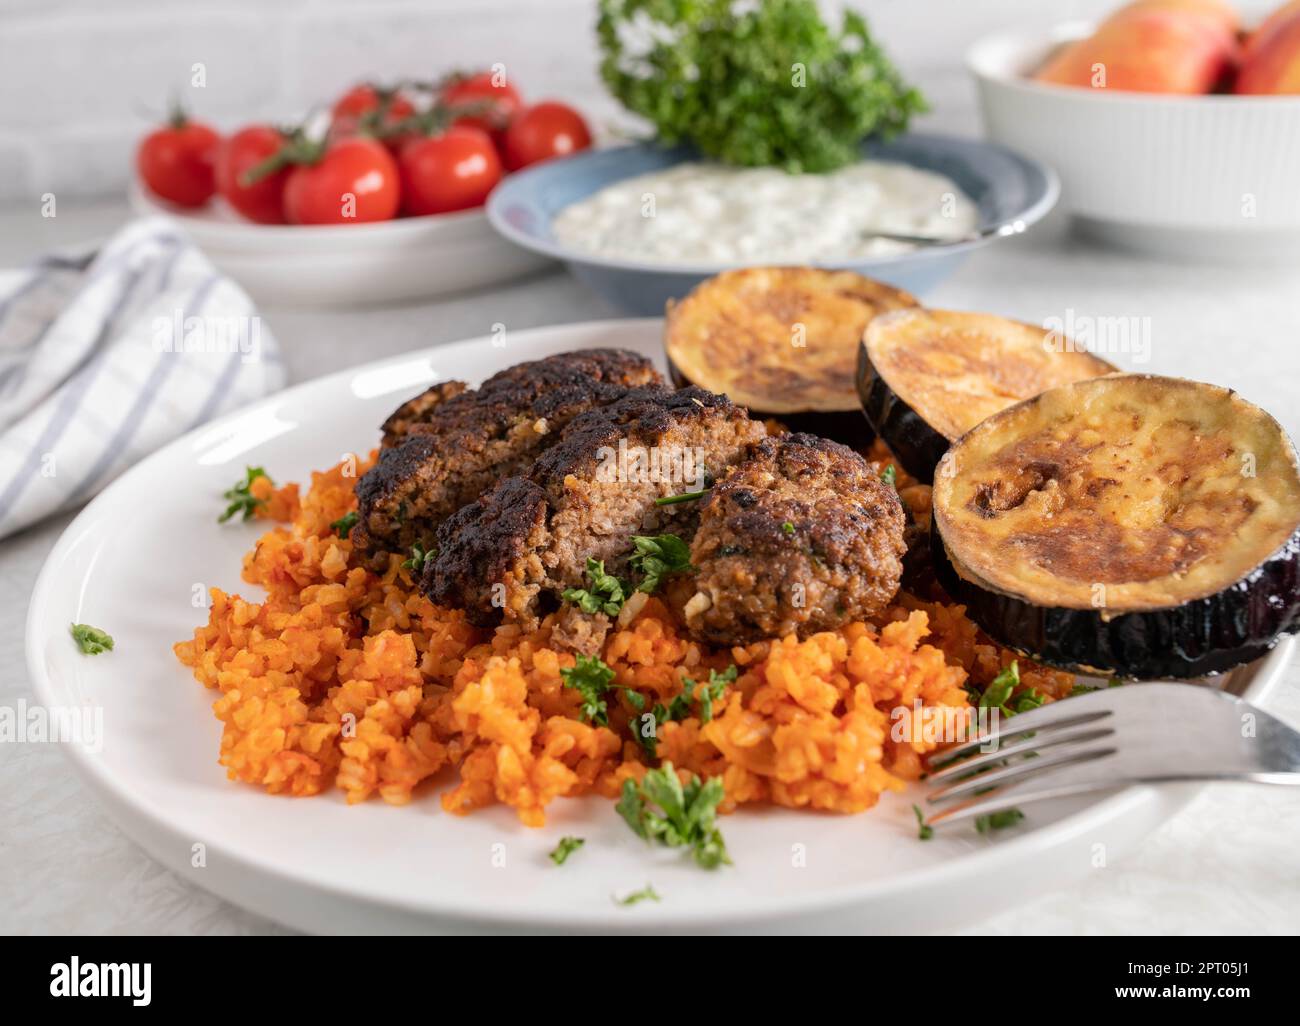 Greek bifteki with feta cheese, tomato rice and fried eggplant on a plate Stock Photo